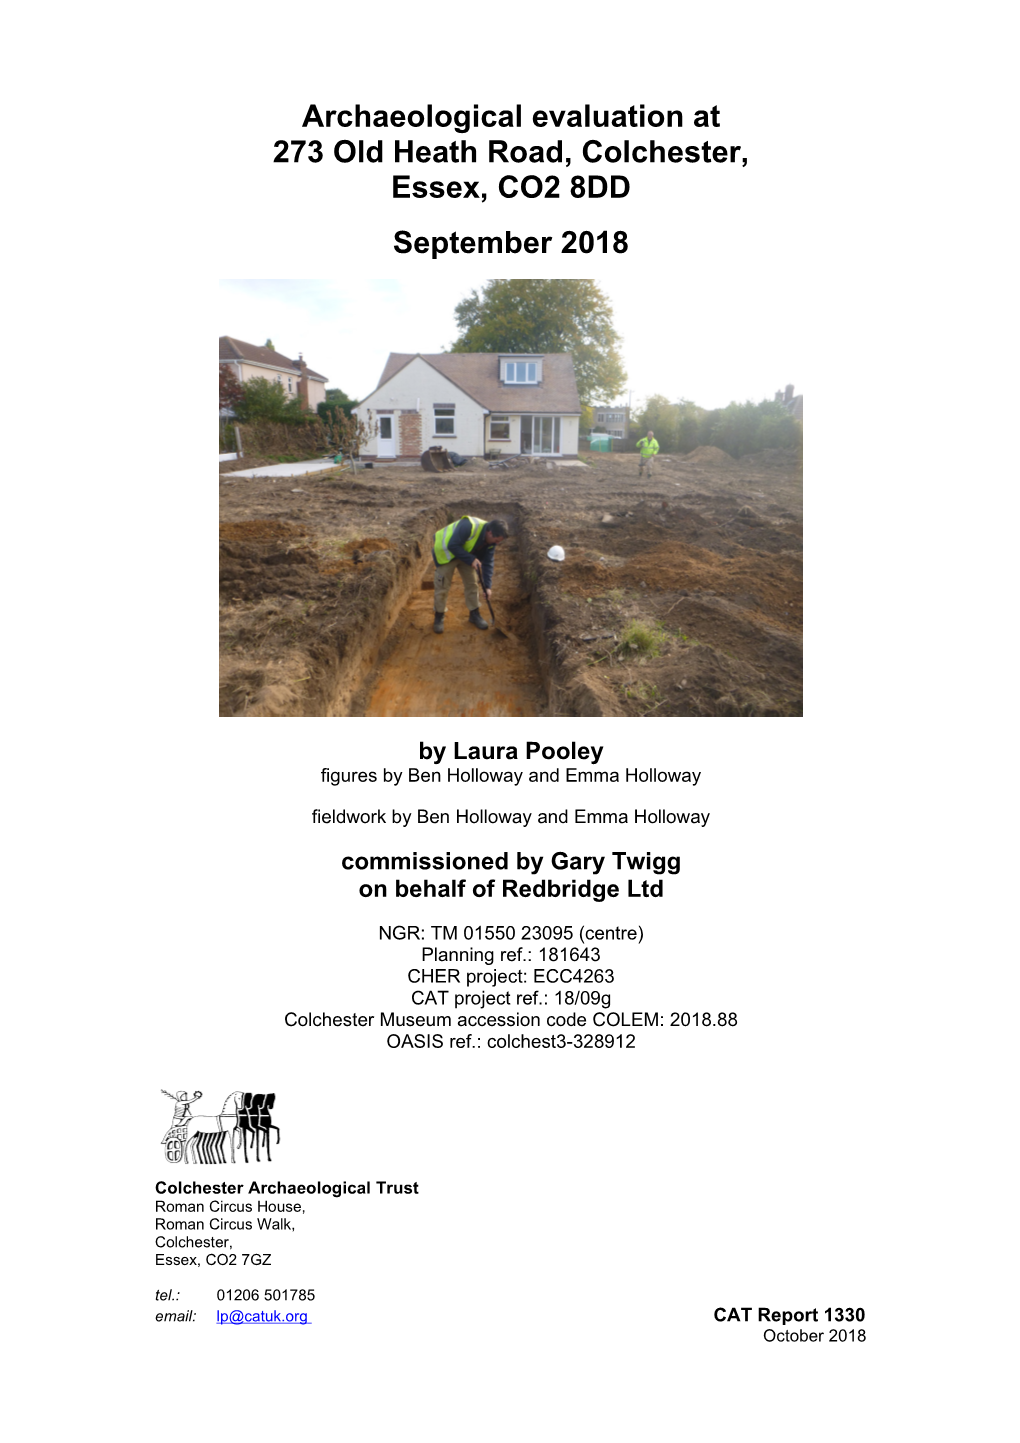 Archaeological Evaluation at 273 Old Heath Road, Colchester, Essex, CO2 8DD September 2018